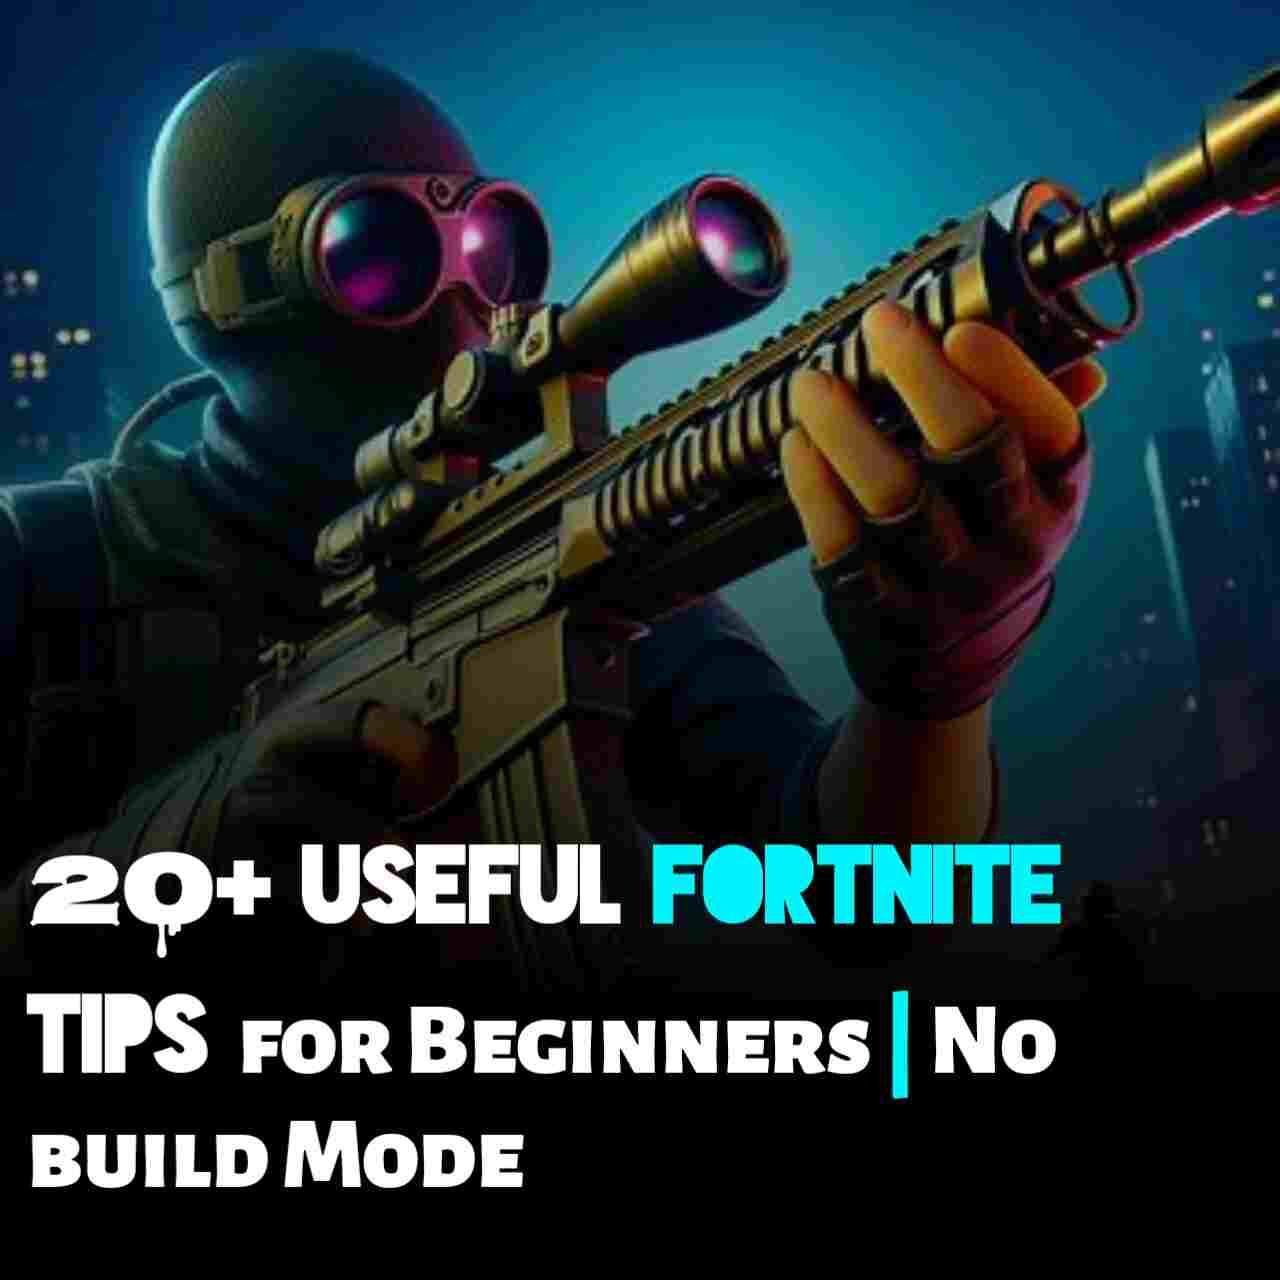 20+ Useful Fortnite tips for beginners at No build Mode